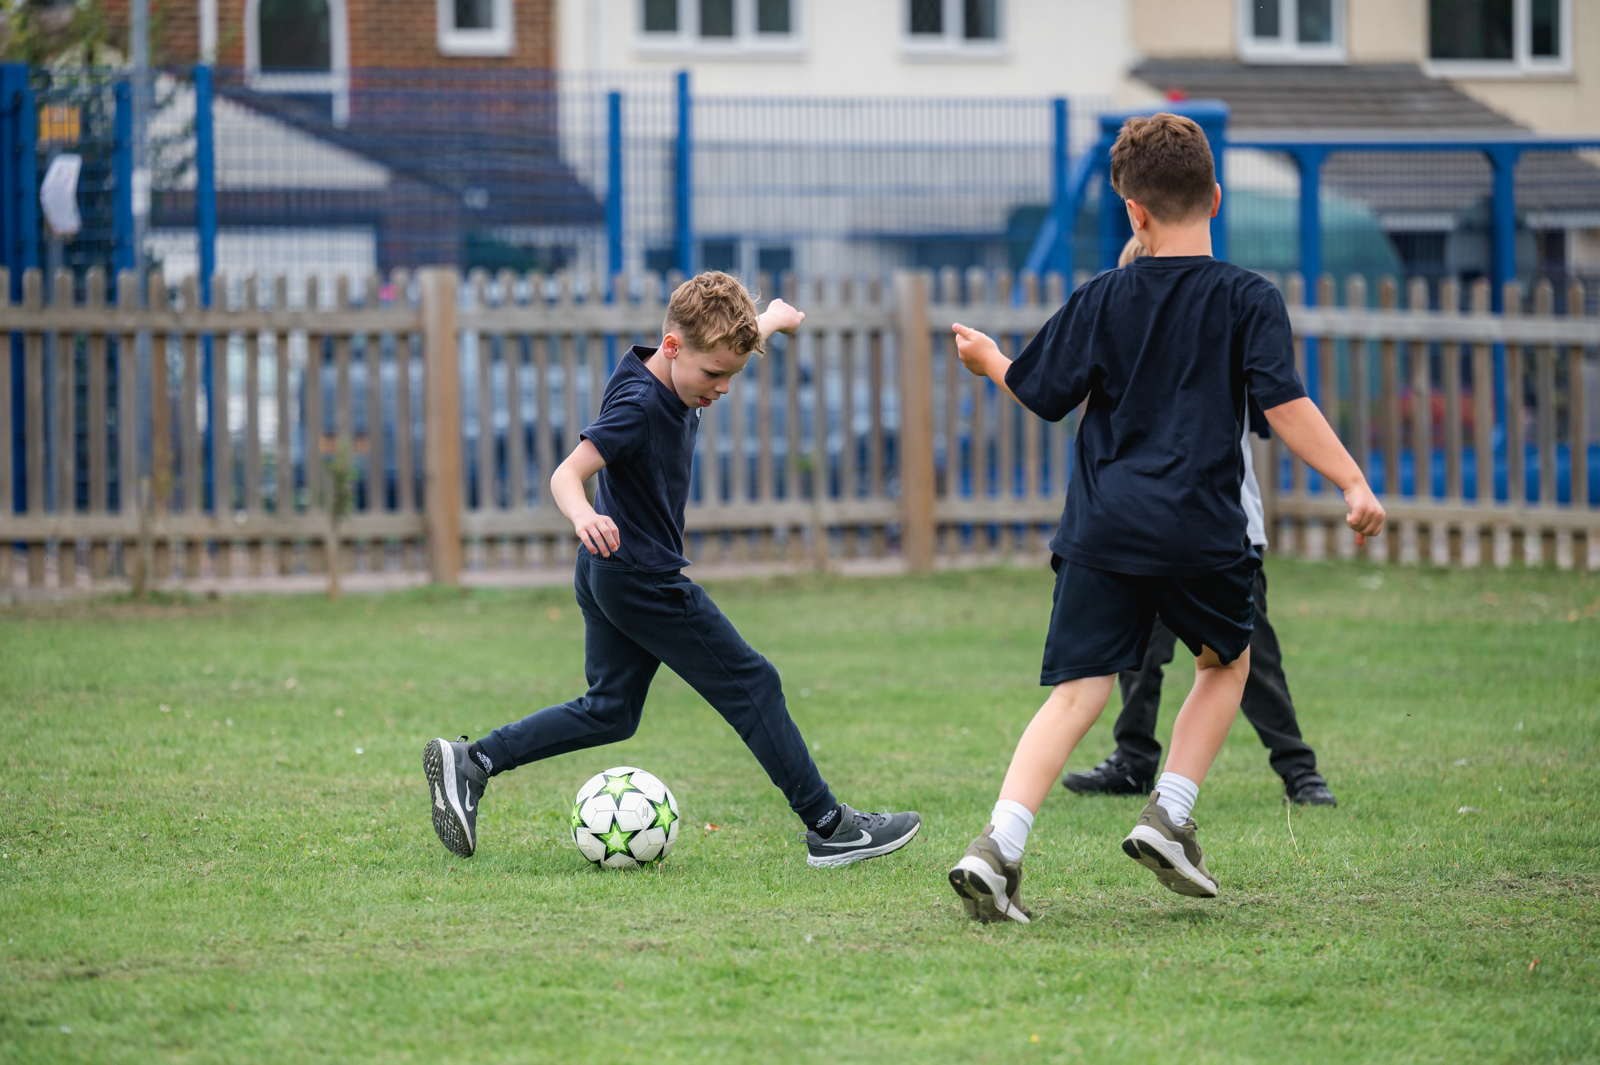 Three boys play a game of football on the school field, one of the boys is about to make a back pass to his team mate.